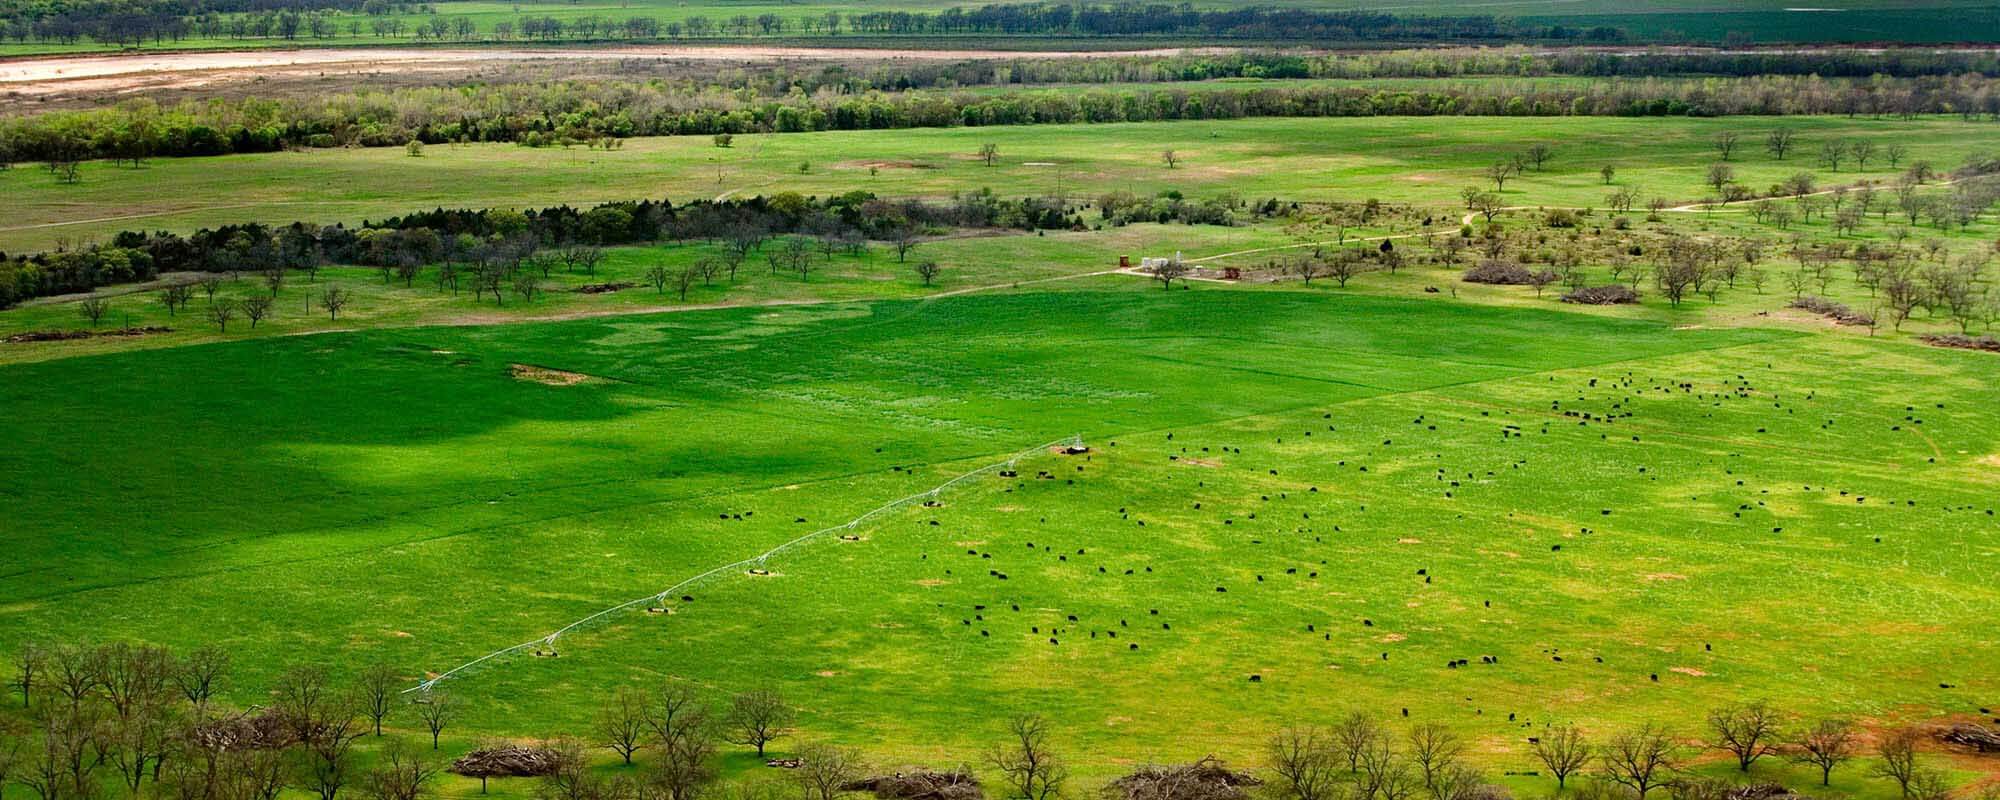 Aerial view of pasture with cattle